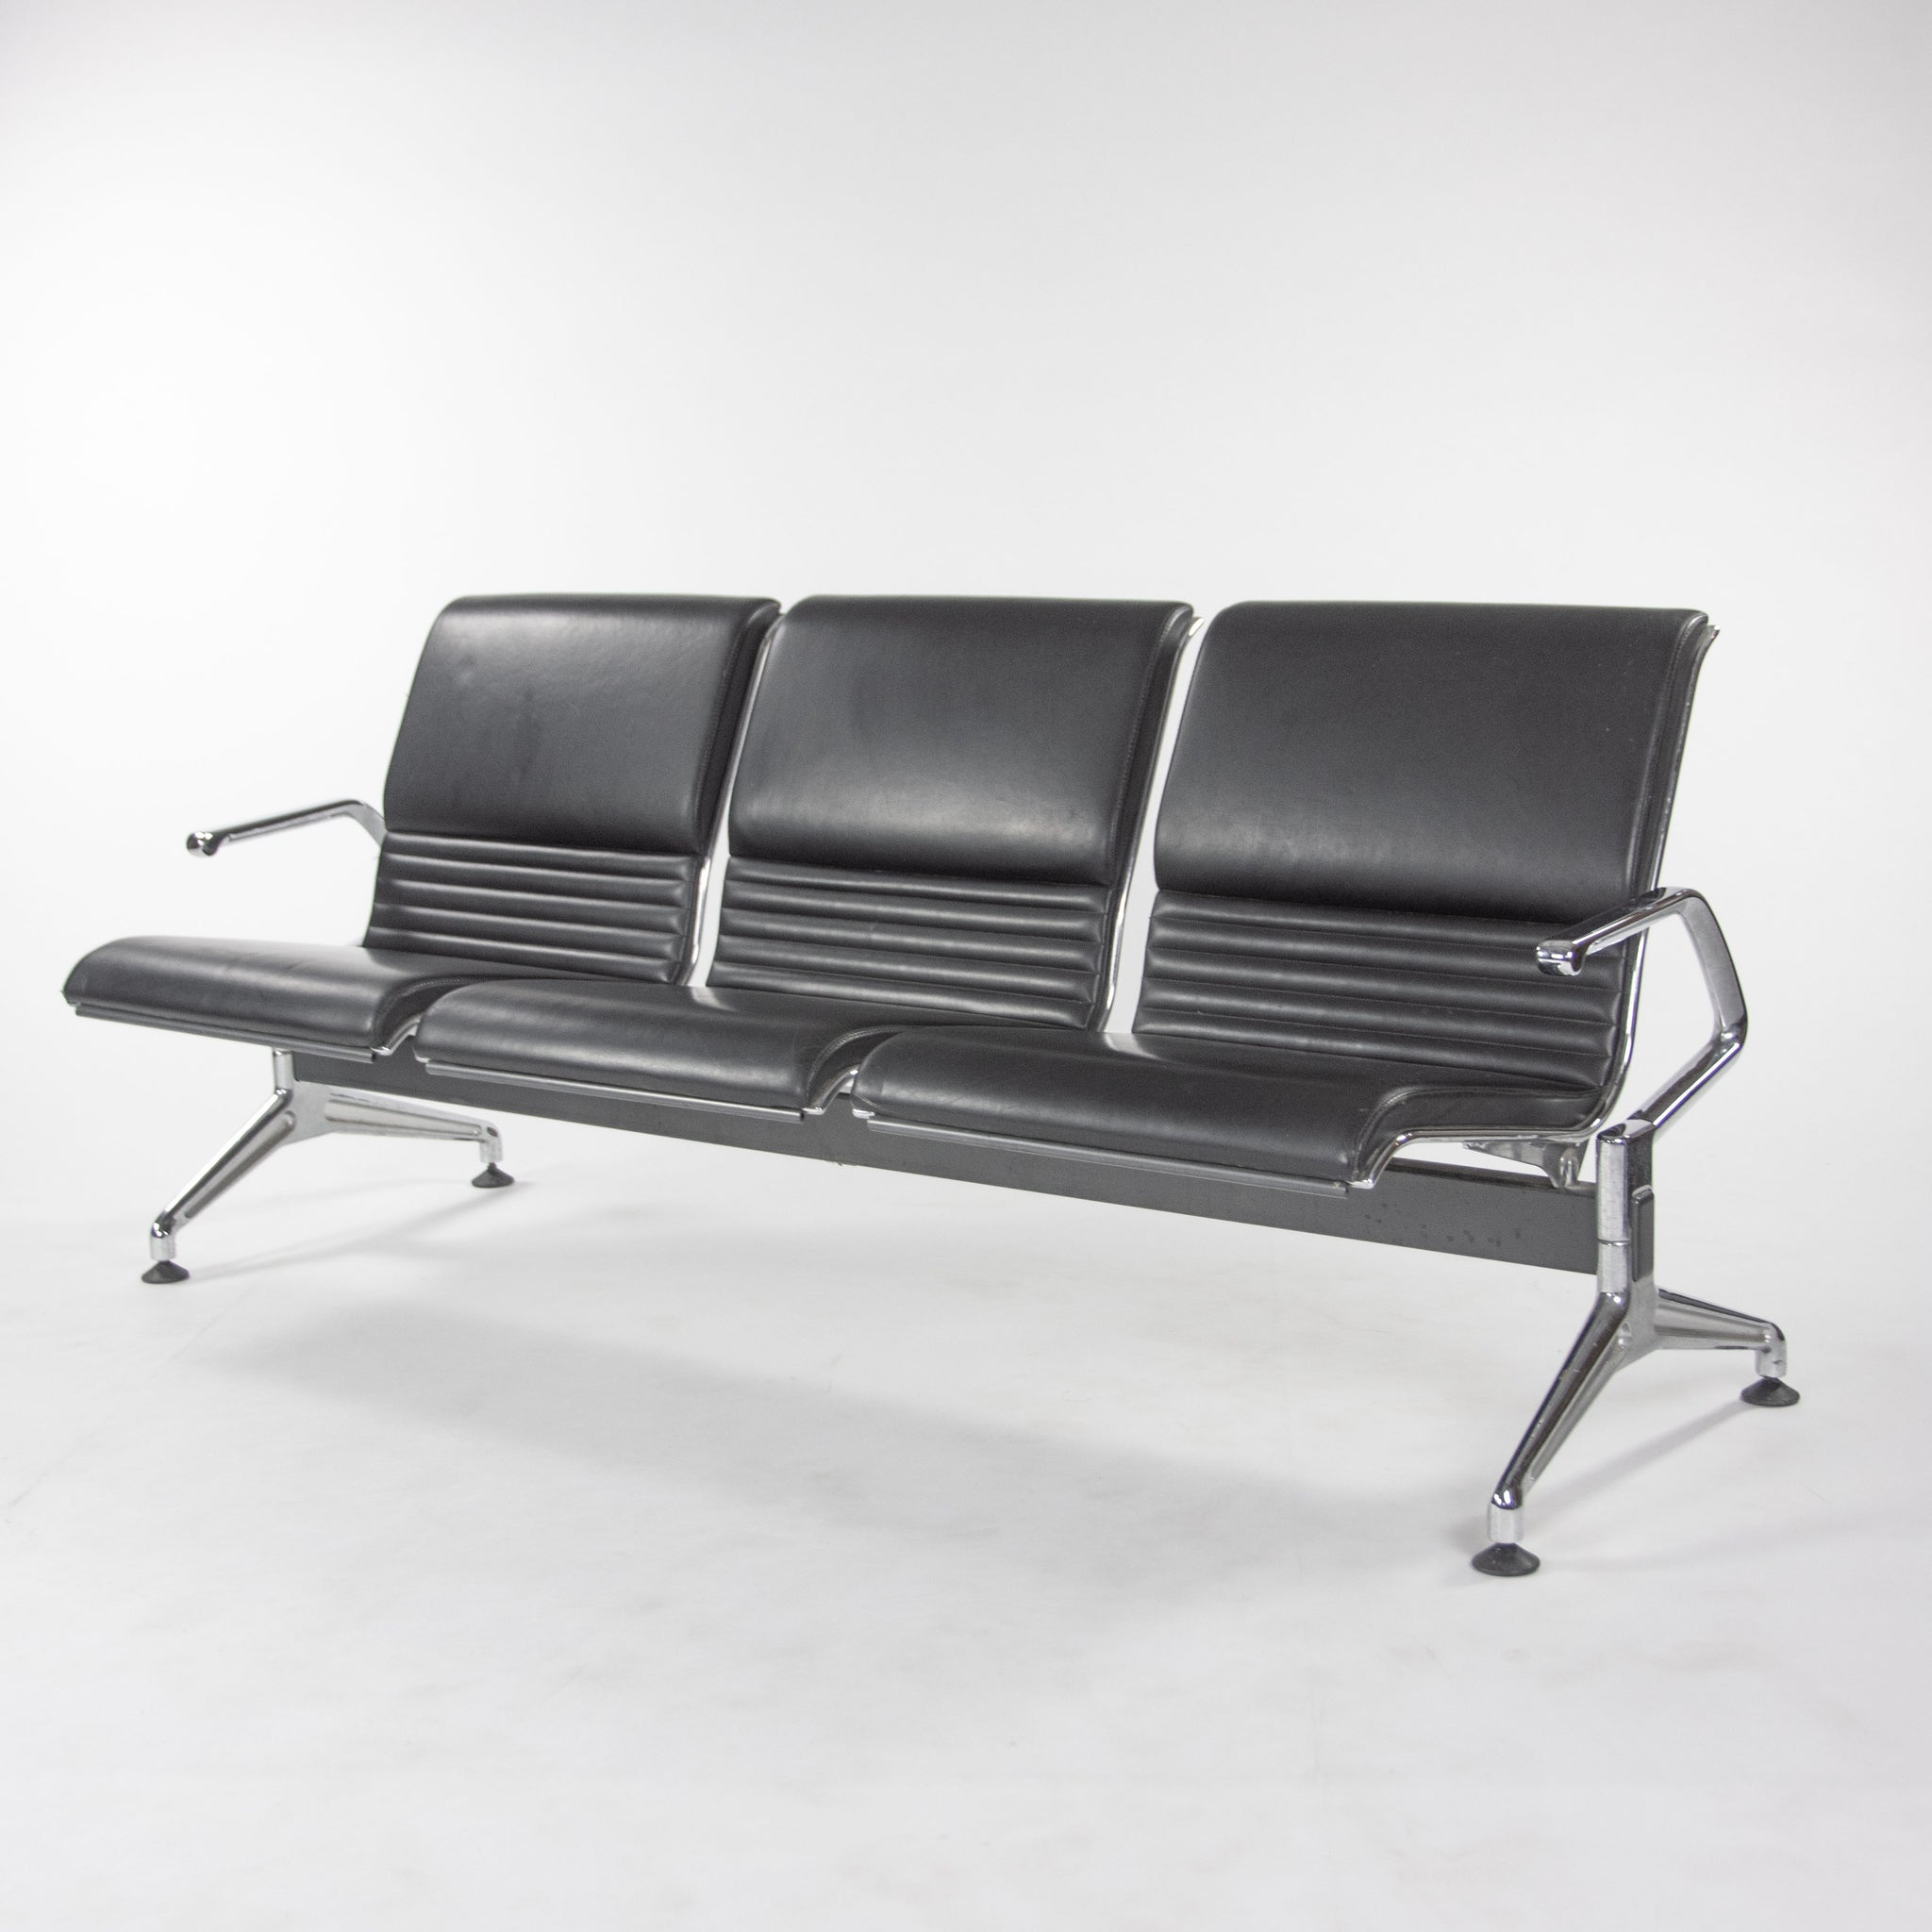 SOLD Jorgen Kastholm Kusch+Co 7130 3-Seater Airport Bench Seating Black Leather